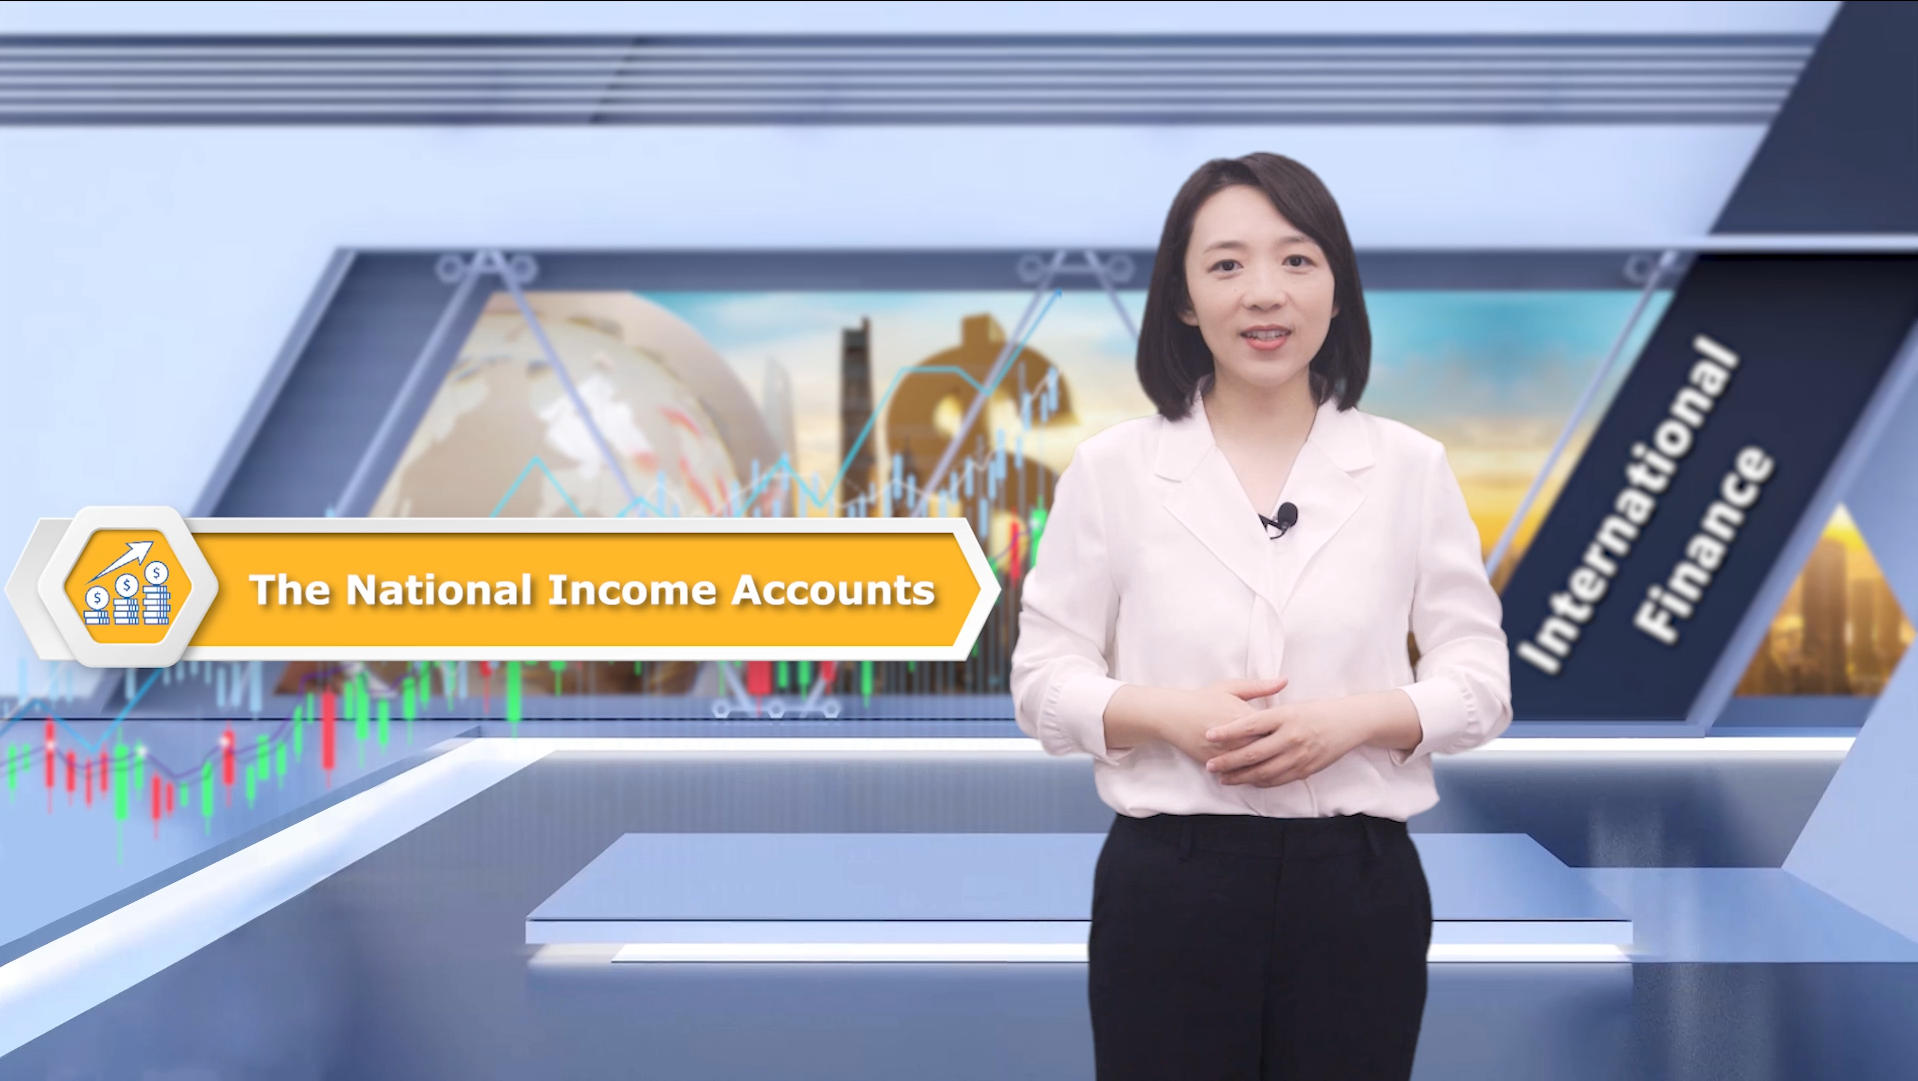 1.1 The national Income Accounts